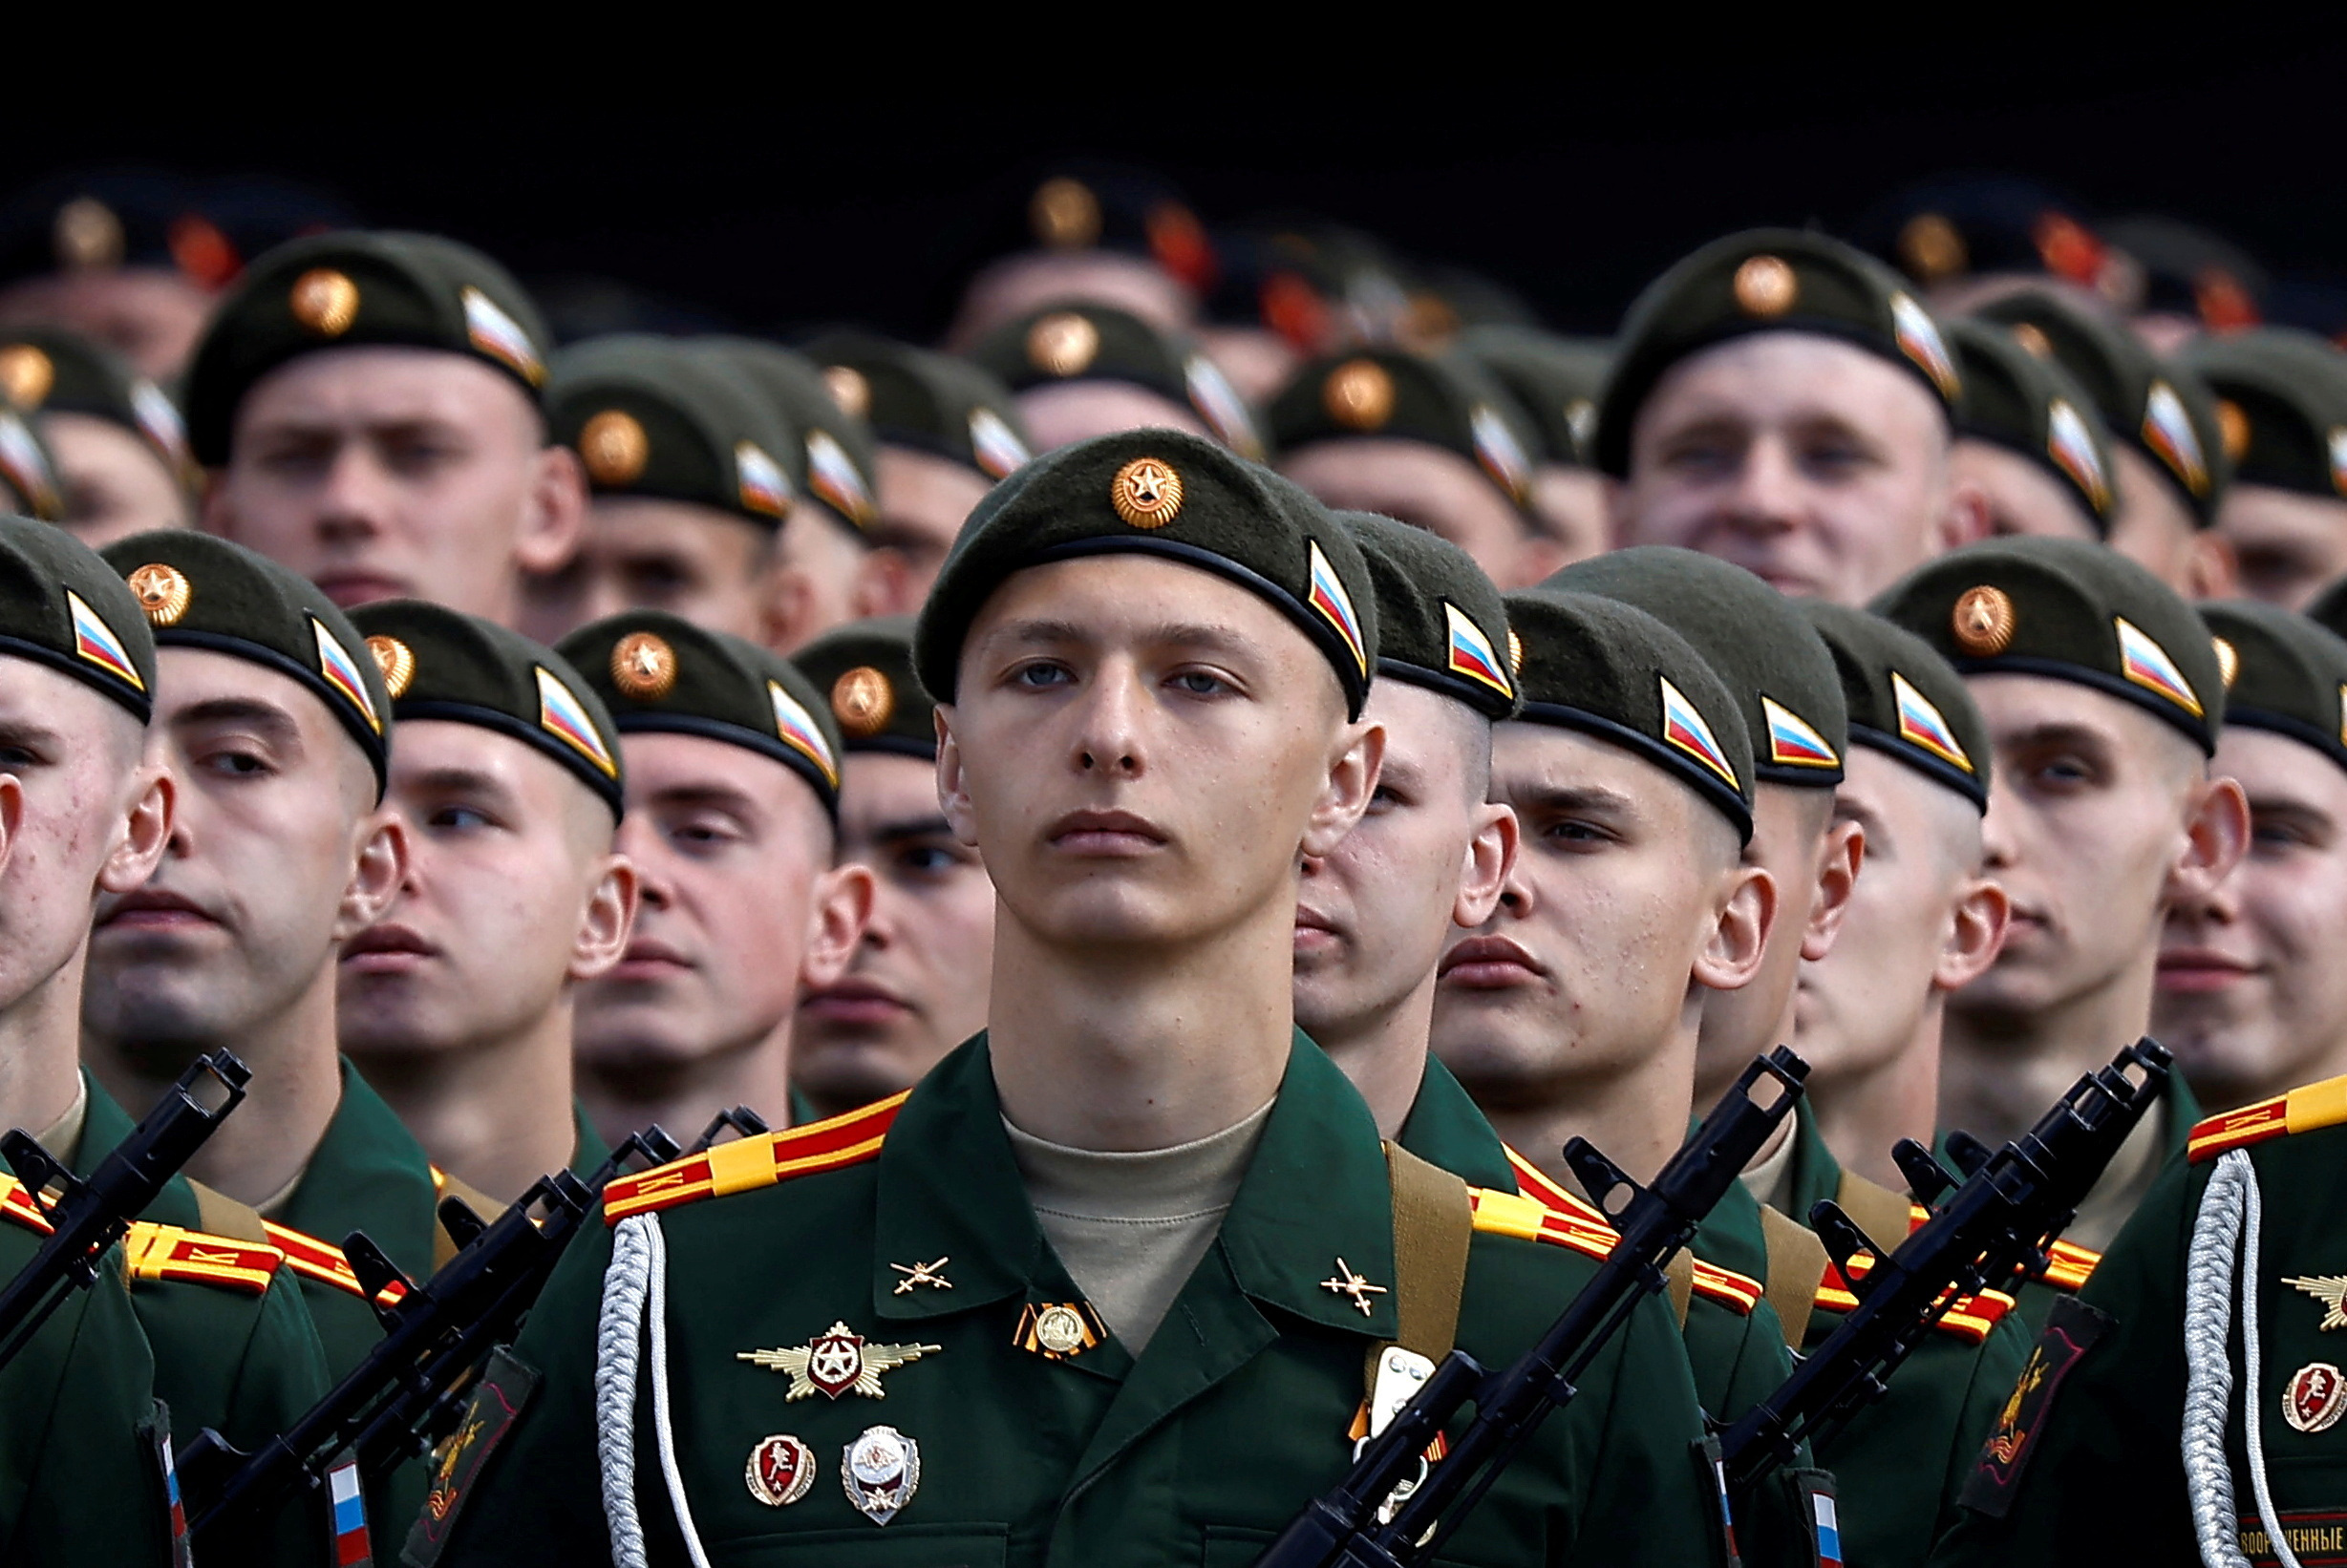 Russia increases maximum size of armed forces by 170,000